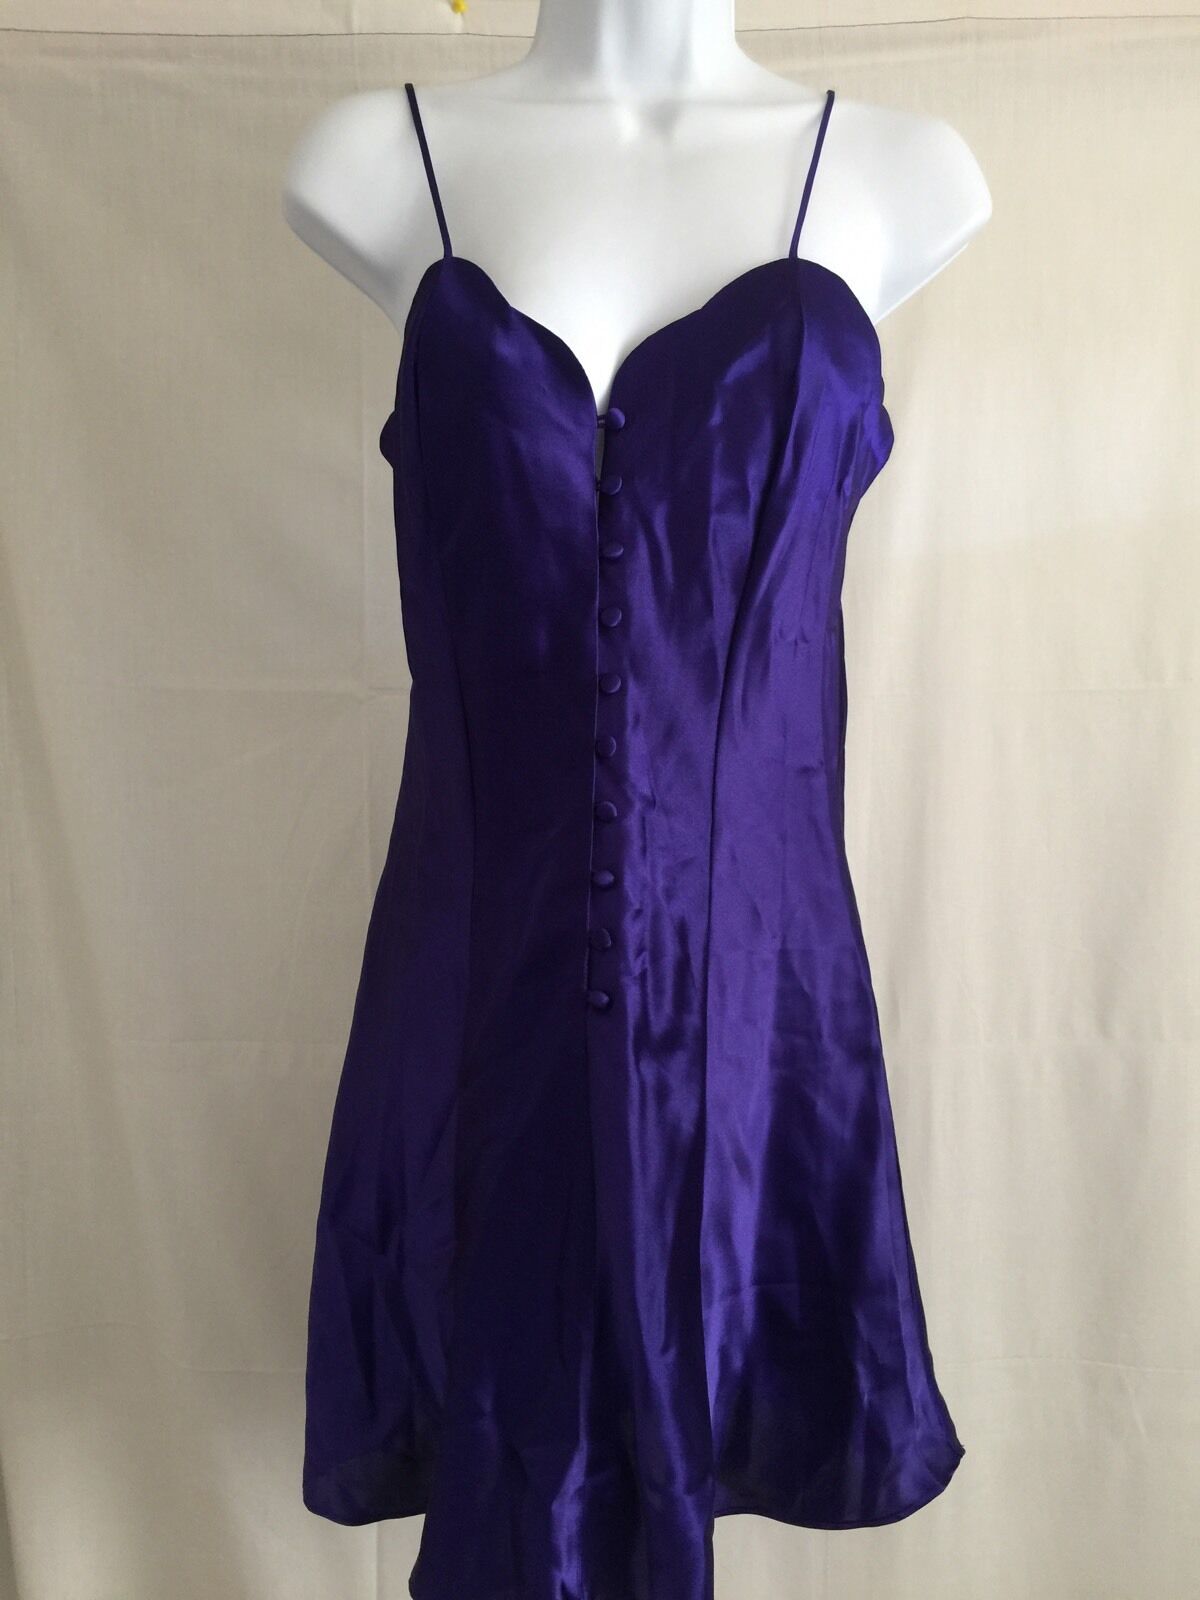 Victoria's Secret Purple Nightgown Gold Label  Above Knee Length Nwt Small